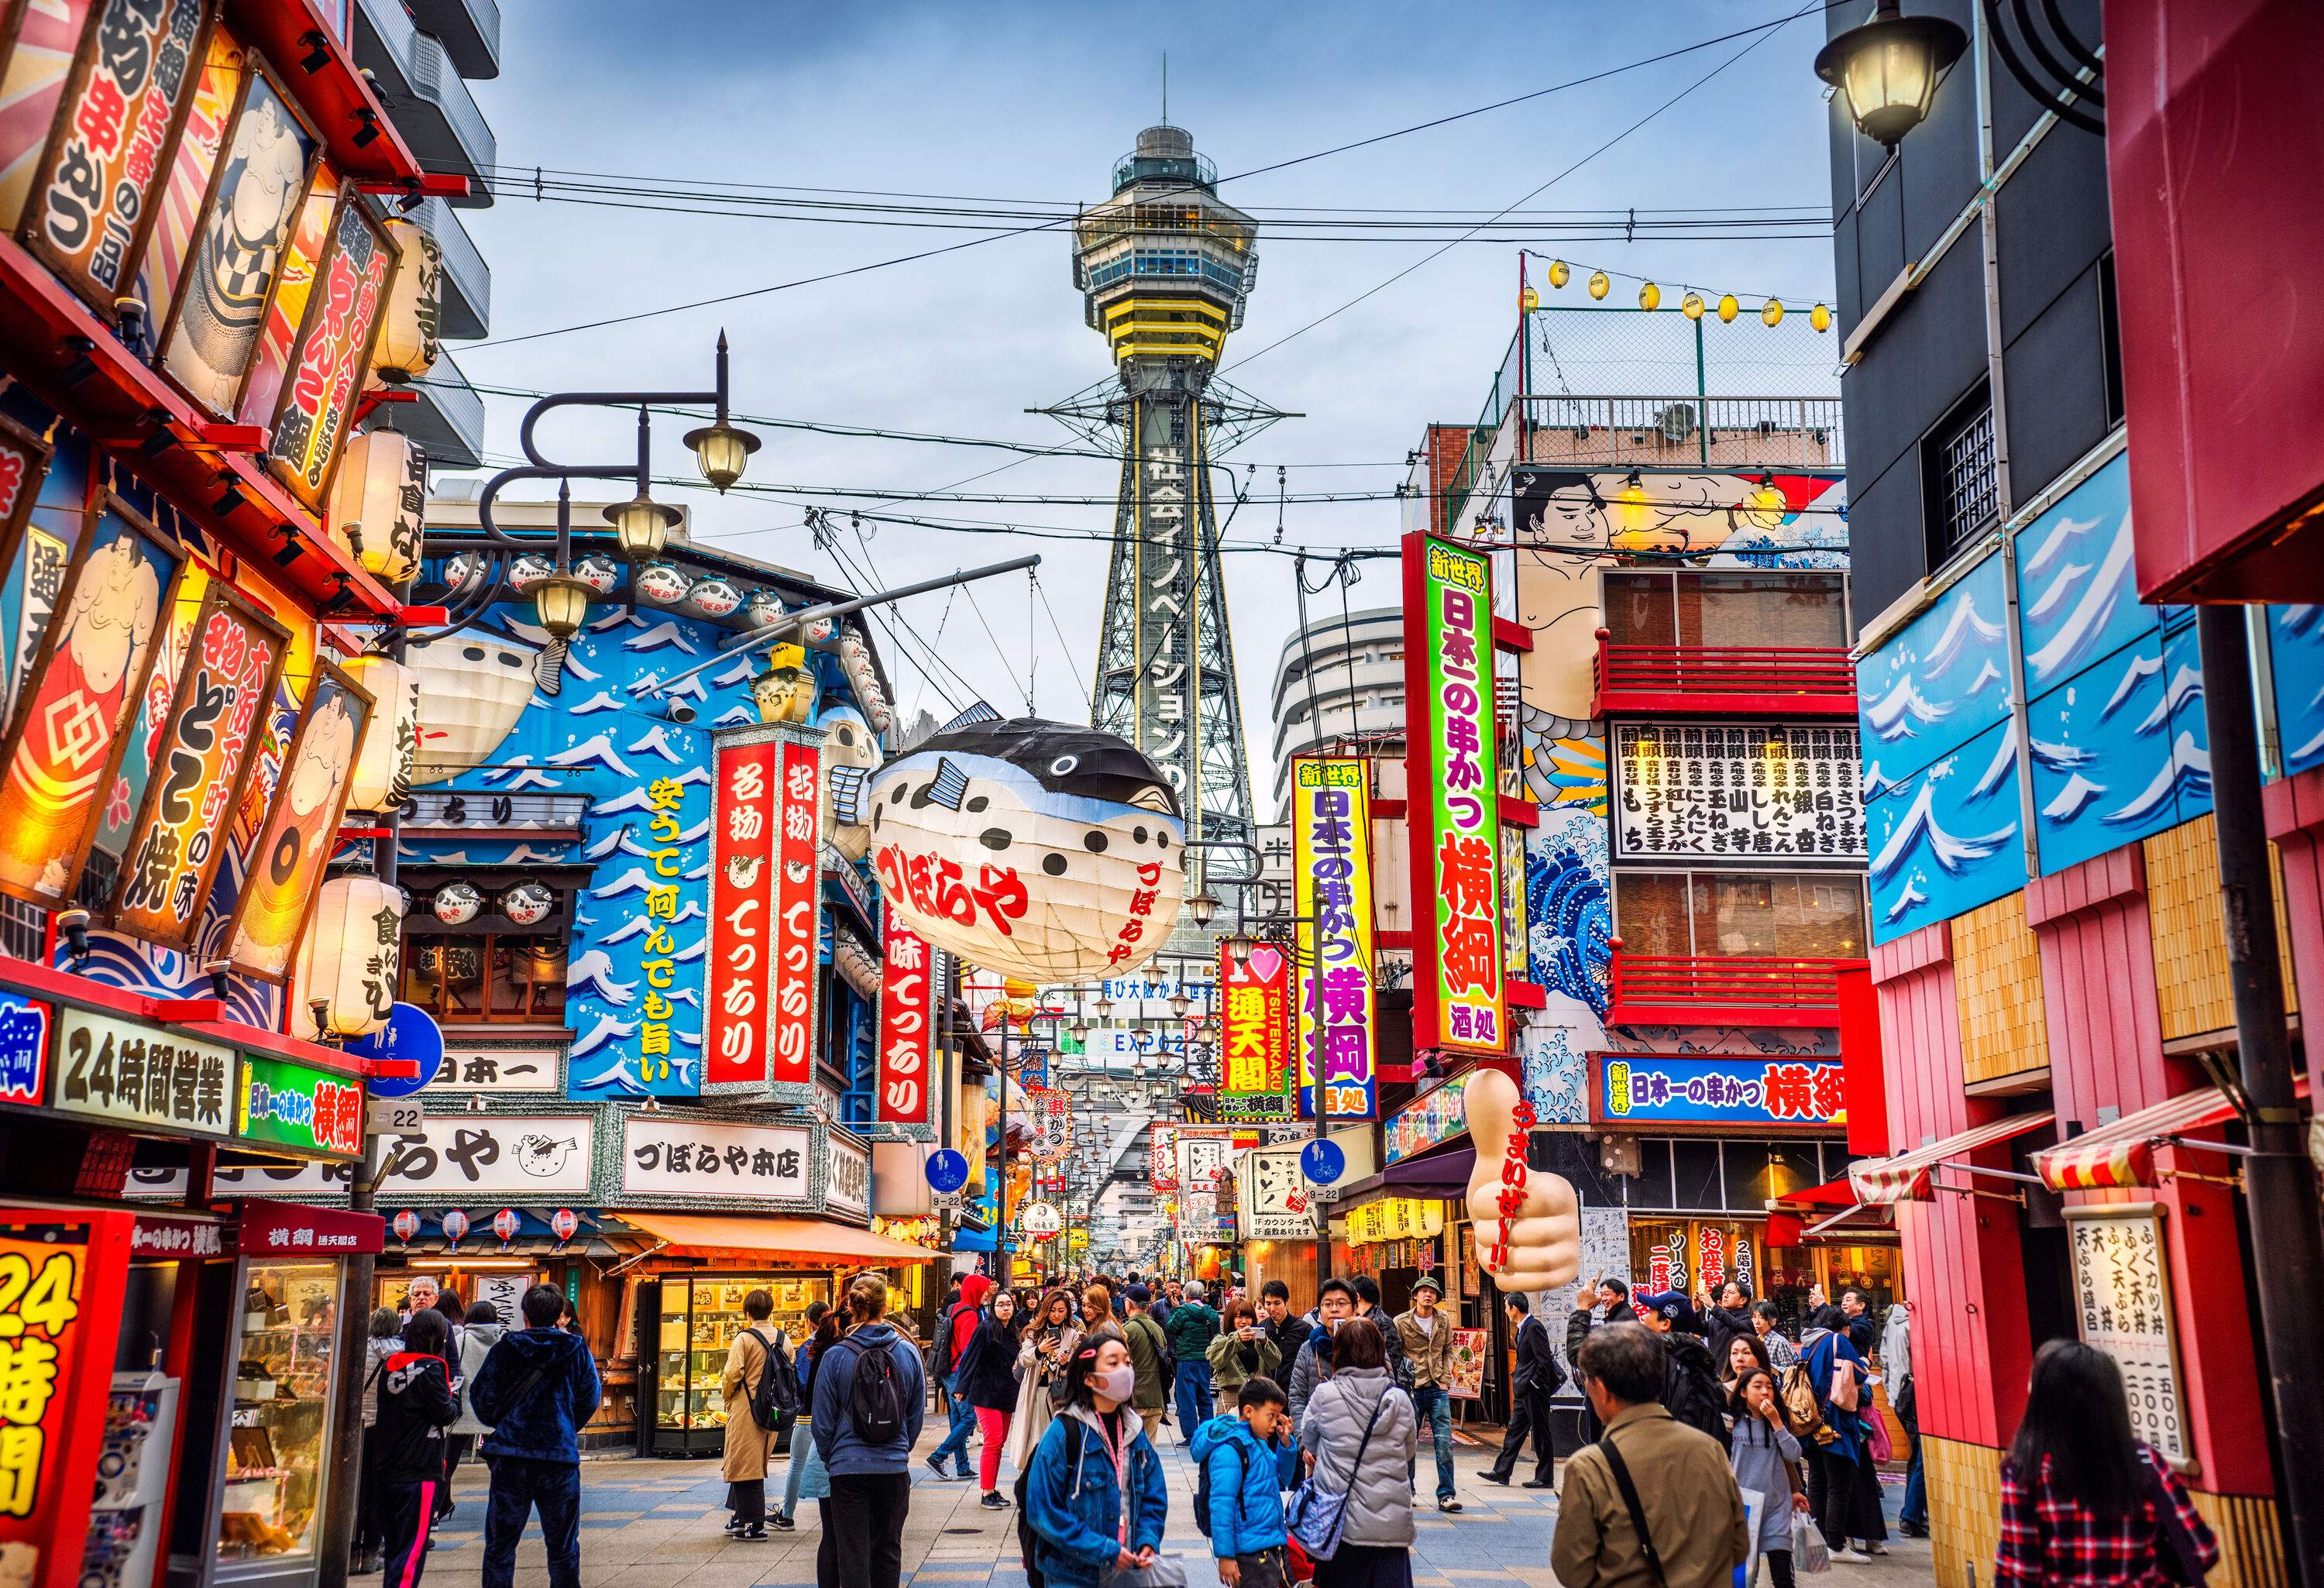 A vibrant neighbourhood decorated with unique signs and the Osaka Tower in the background.